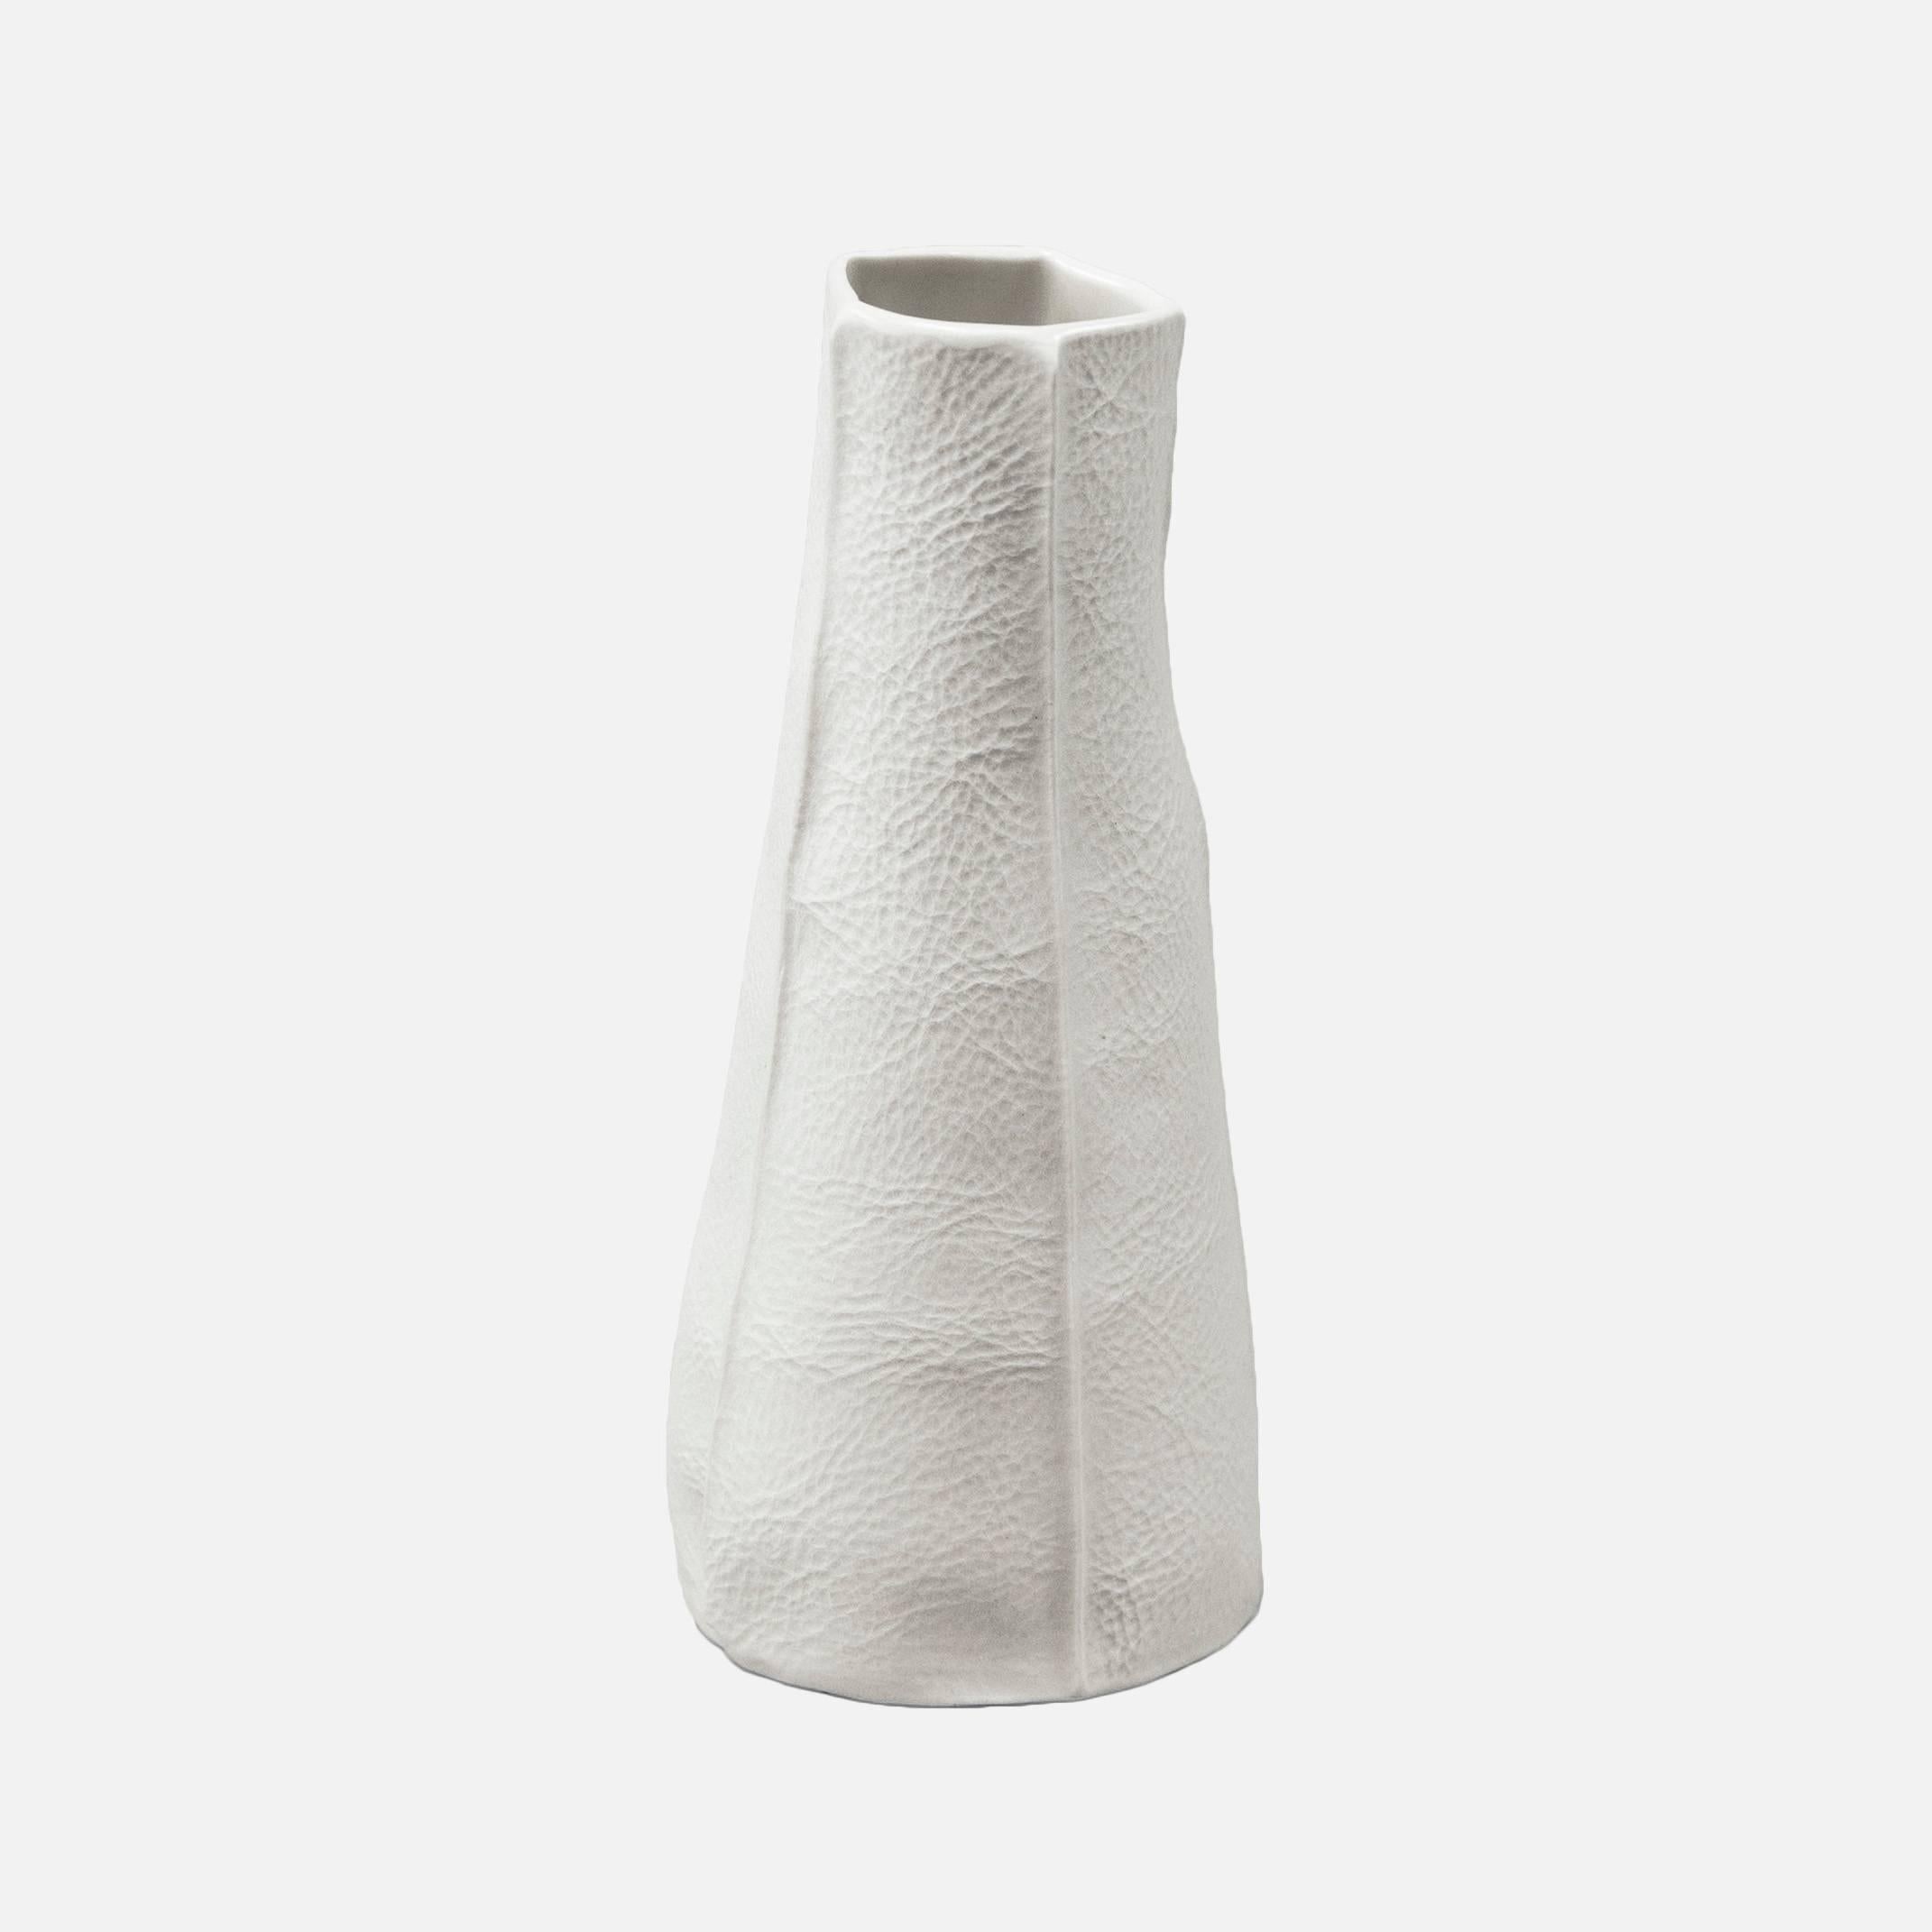 This pair of Kawa vases includes two pieces handcrafted by the designer (and Souda's Co-Owner), Luft Tanaka. The price is for both vases. Each pair vases is made to order with a process that involves casting liquid porcelain into a mold that's made